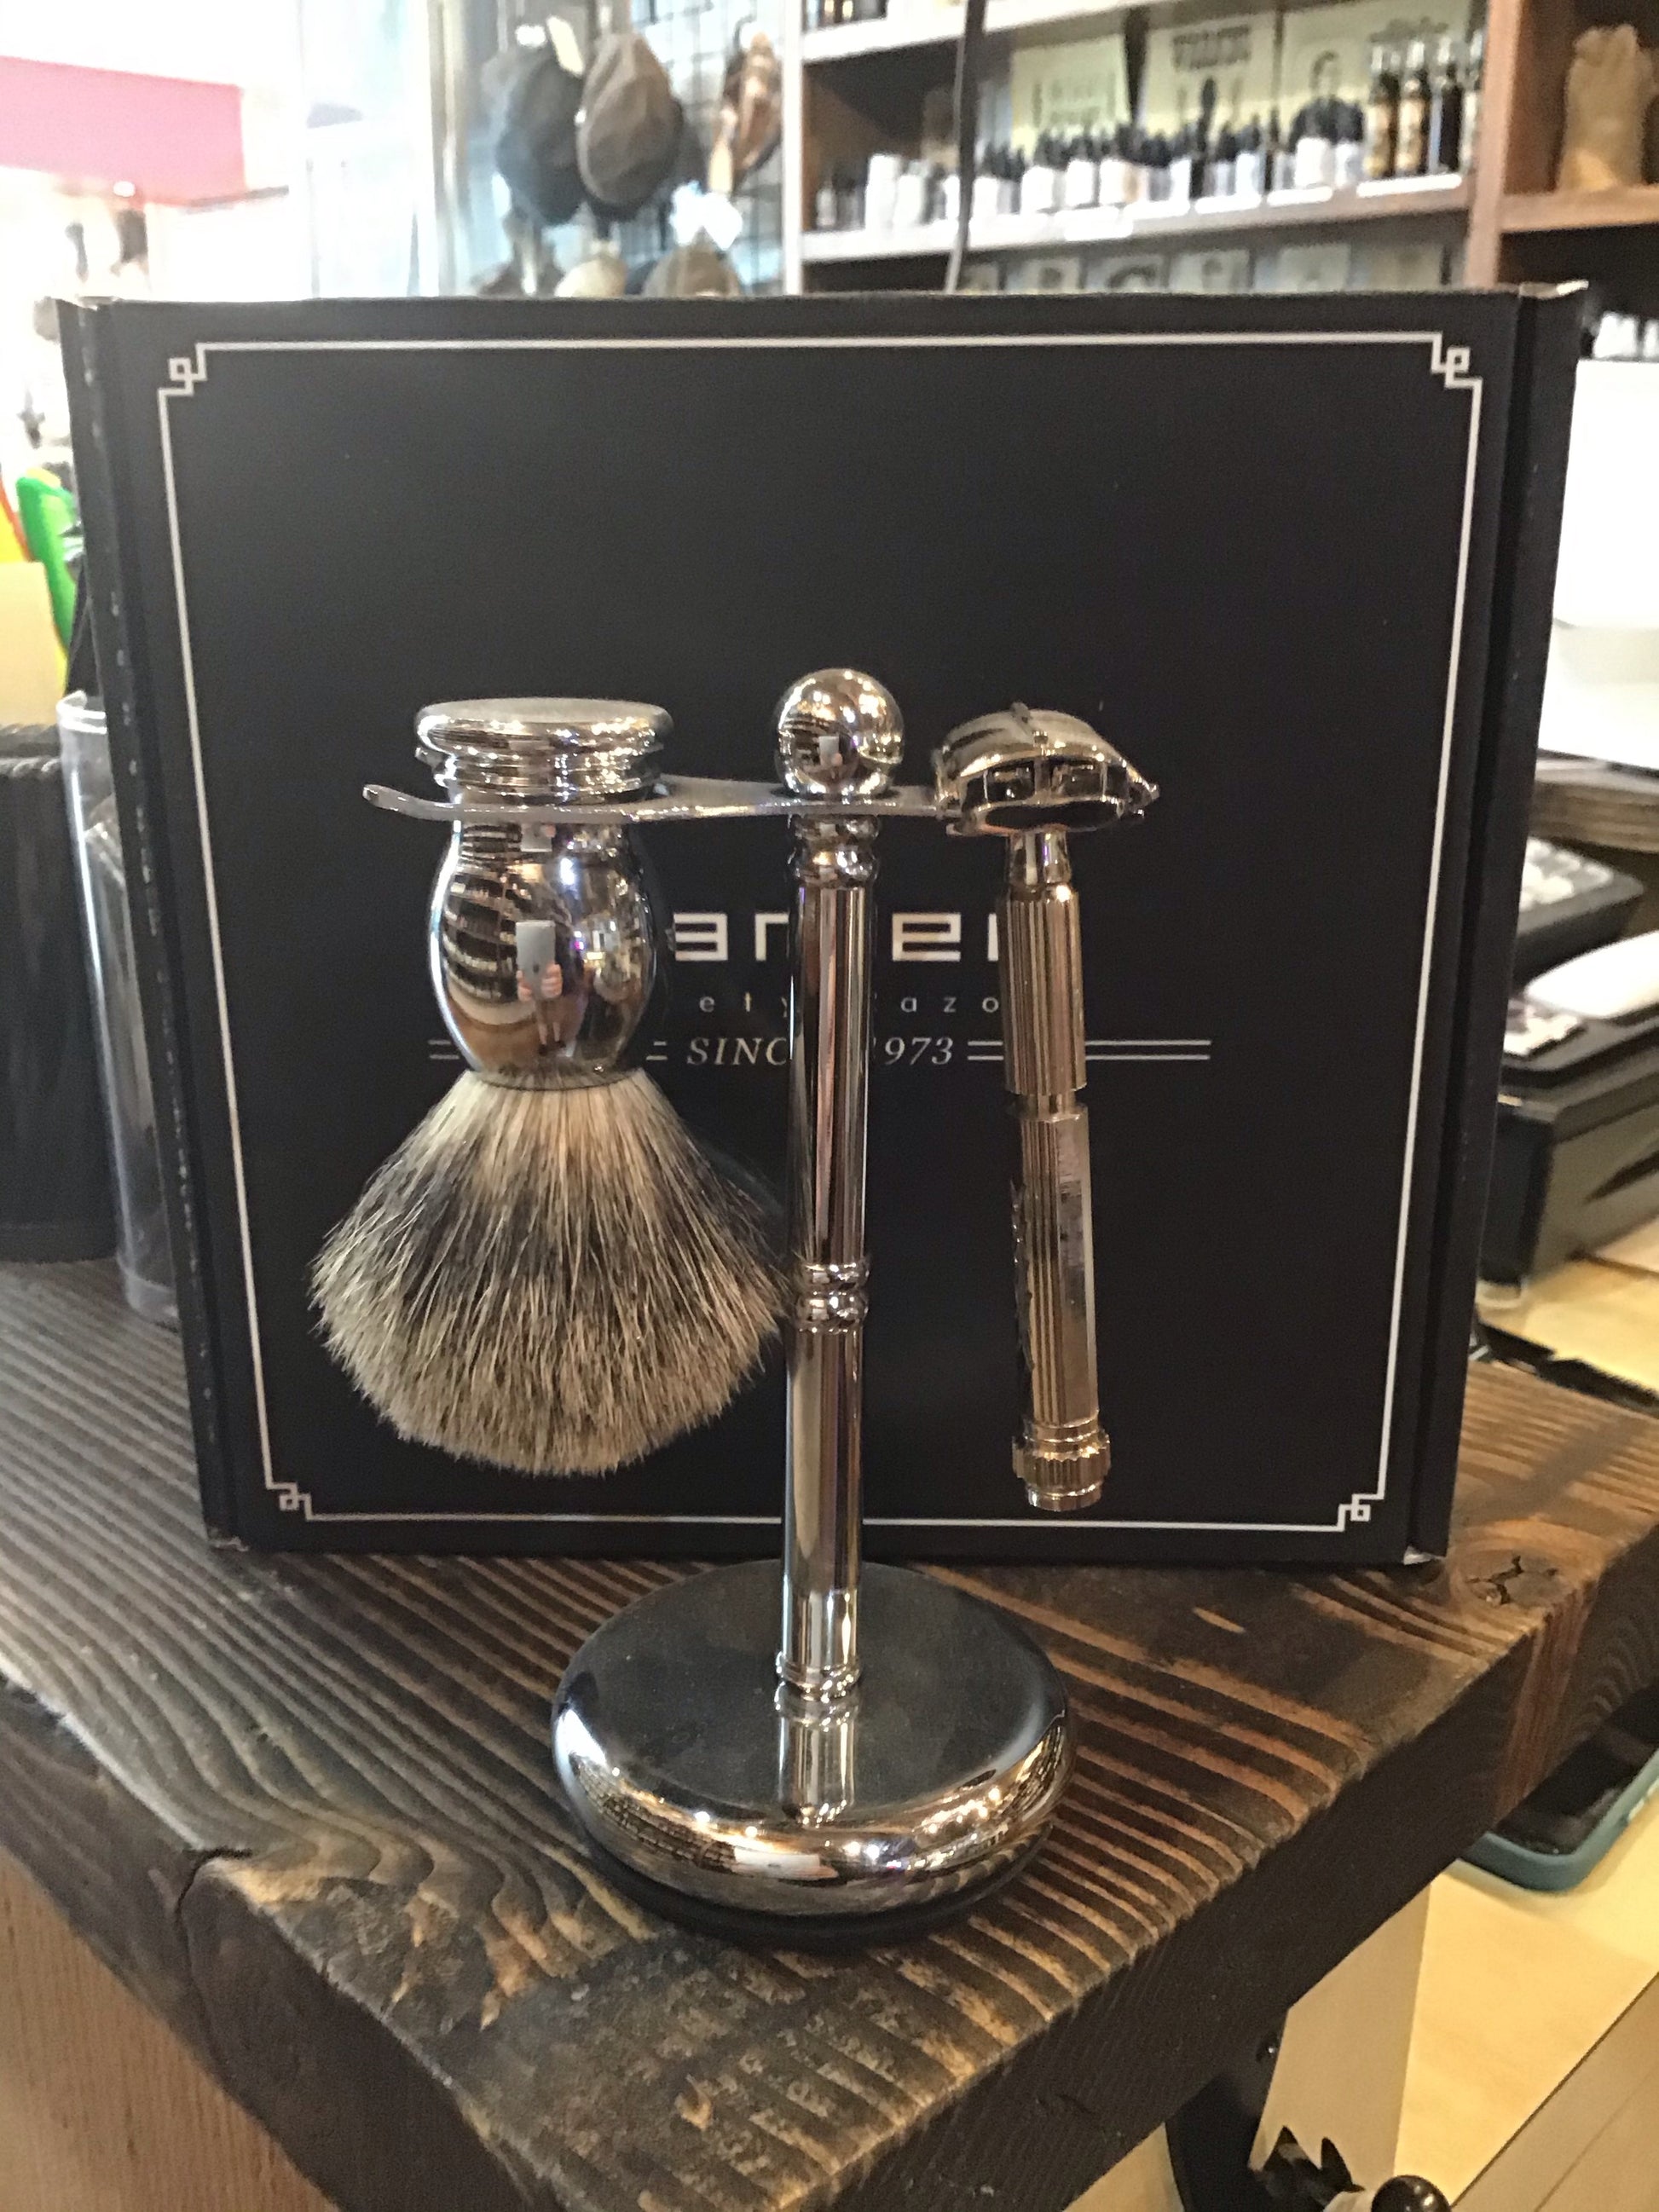 60R Safety Razor and CHPB Brush Kit sold new at the Mini Moustachery, the national men's grooming and beard care depot store. This single blade, vintage design style safety razor is well balanced and angled to shave close and comfortably - the smooth, heavy duty handle allows for comfortable pressure and even weight distribution. The brush and stand completes the beard and mustache aesthetic.